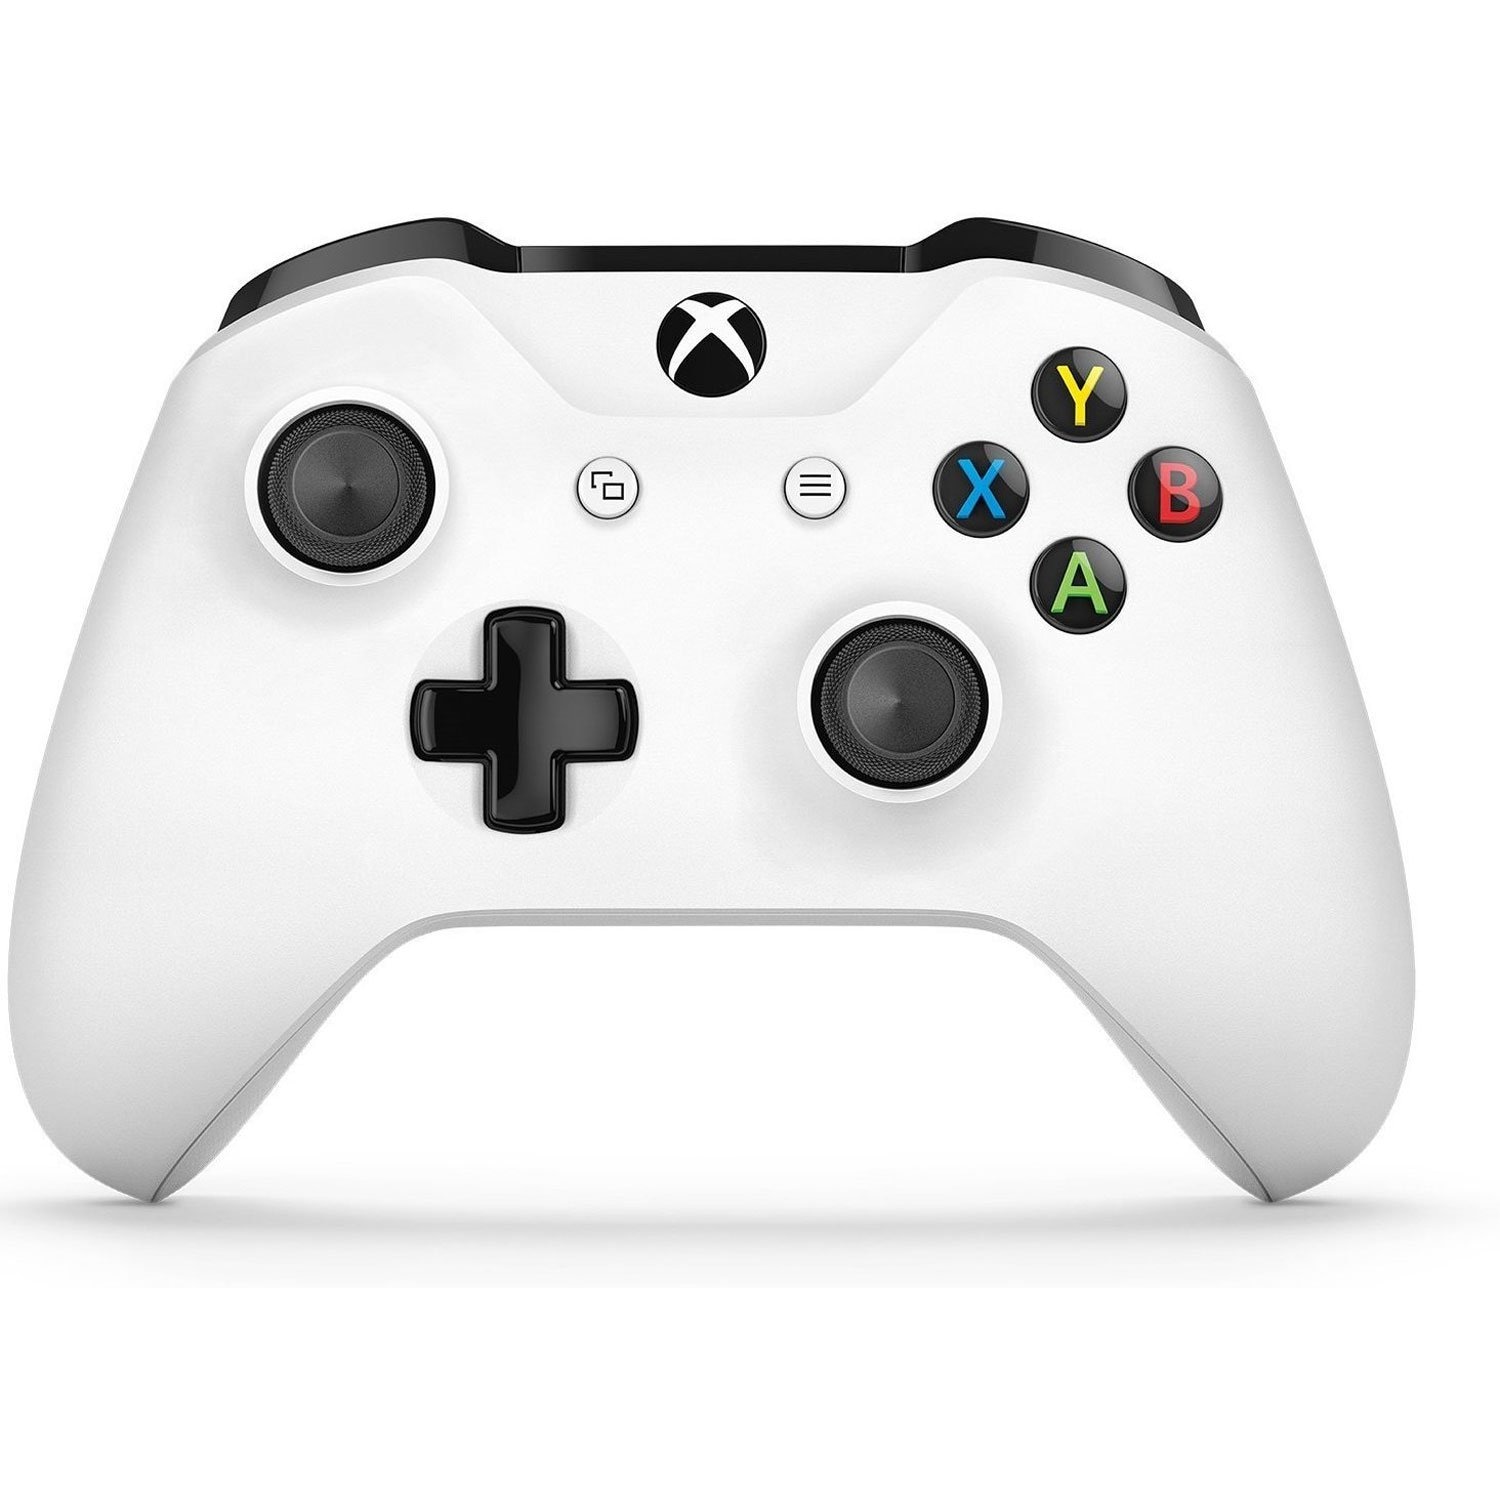 Xbox One Controller Wireless 6-Axis Dual Vibration Joystick Gamepad For Xbox One Slim Console /PC Win 7 8 10 White - 1